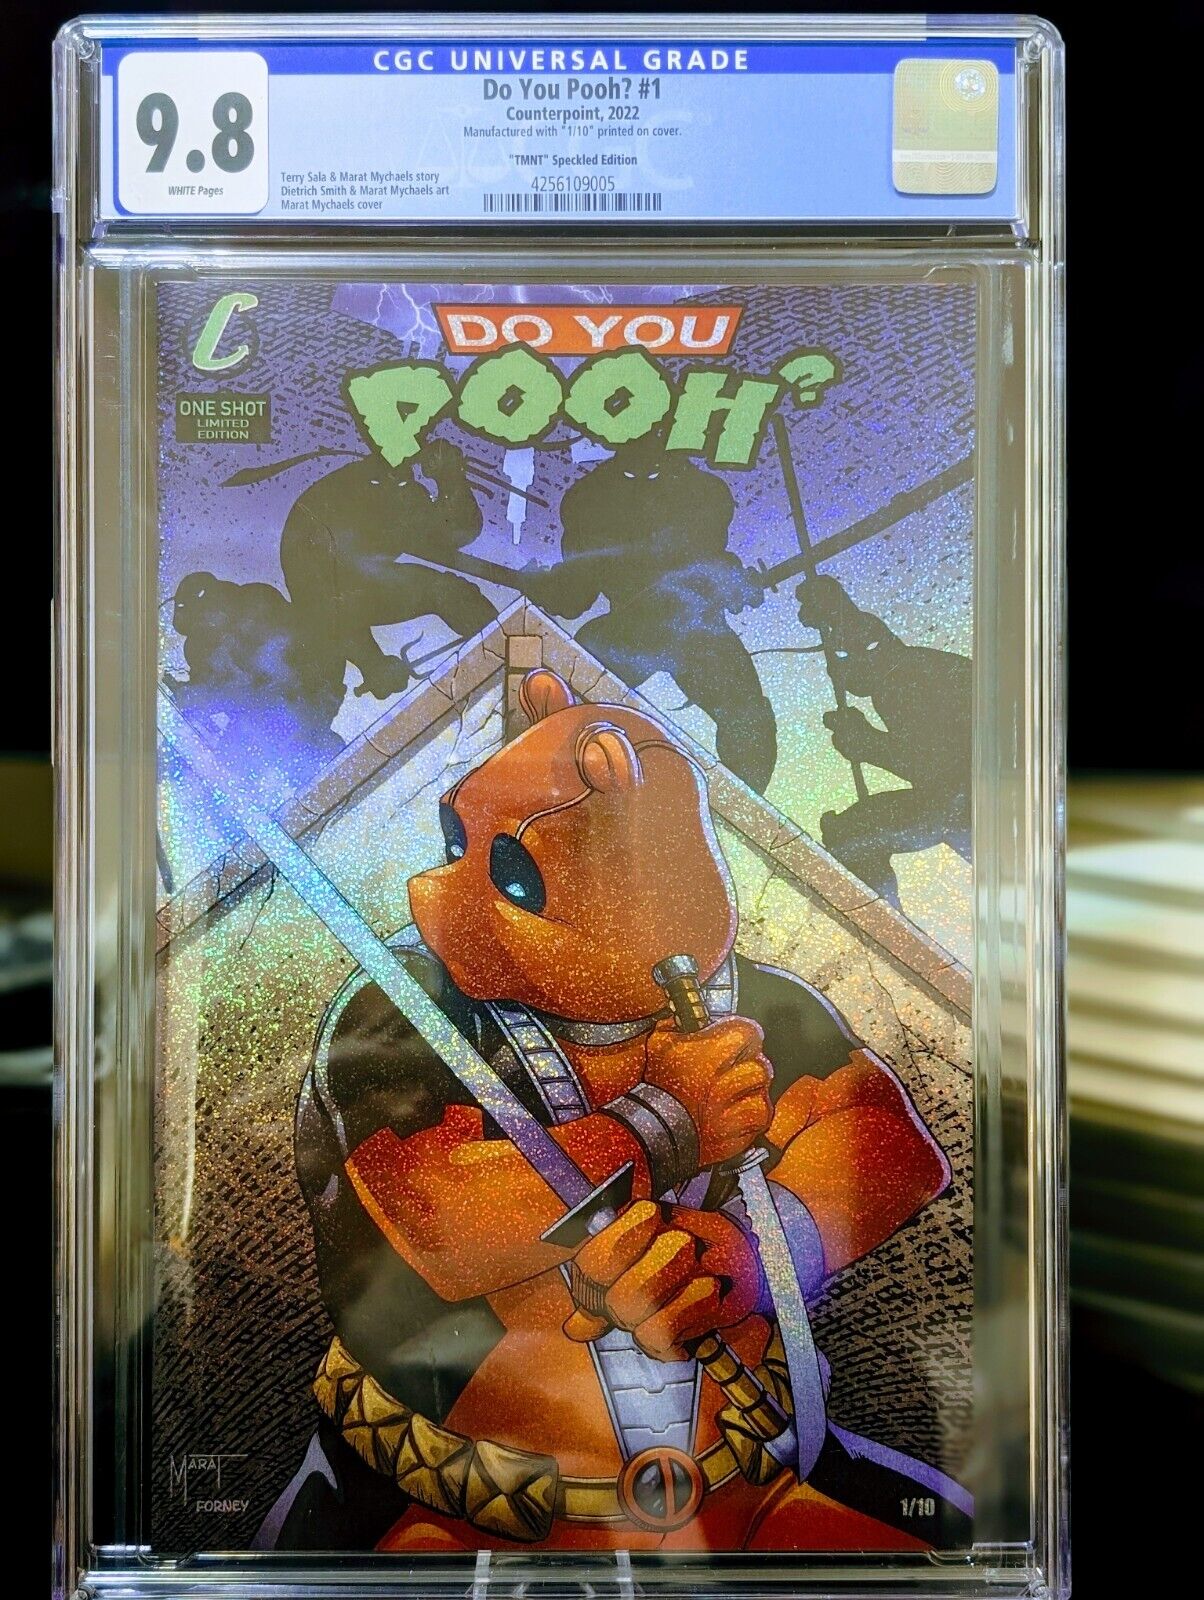 Do You Pooh #1 Very Limited 1/10 “TMNT” Speckled Edition CGC 9.8 #1 Out Of 10